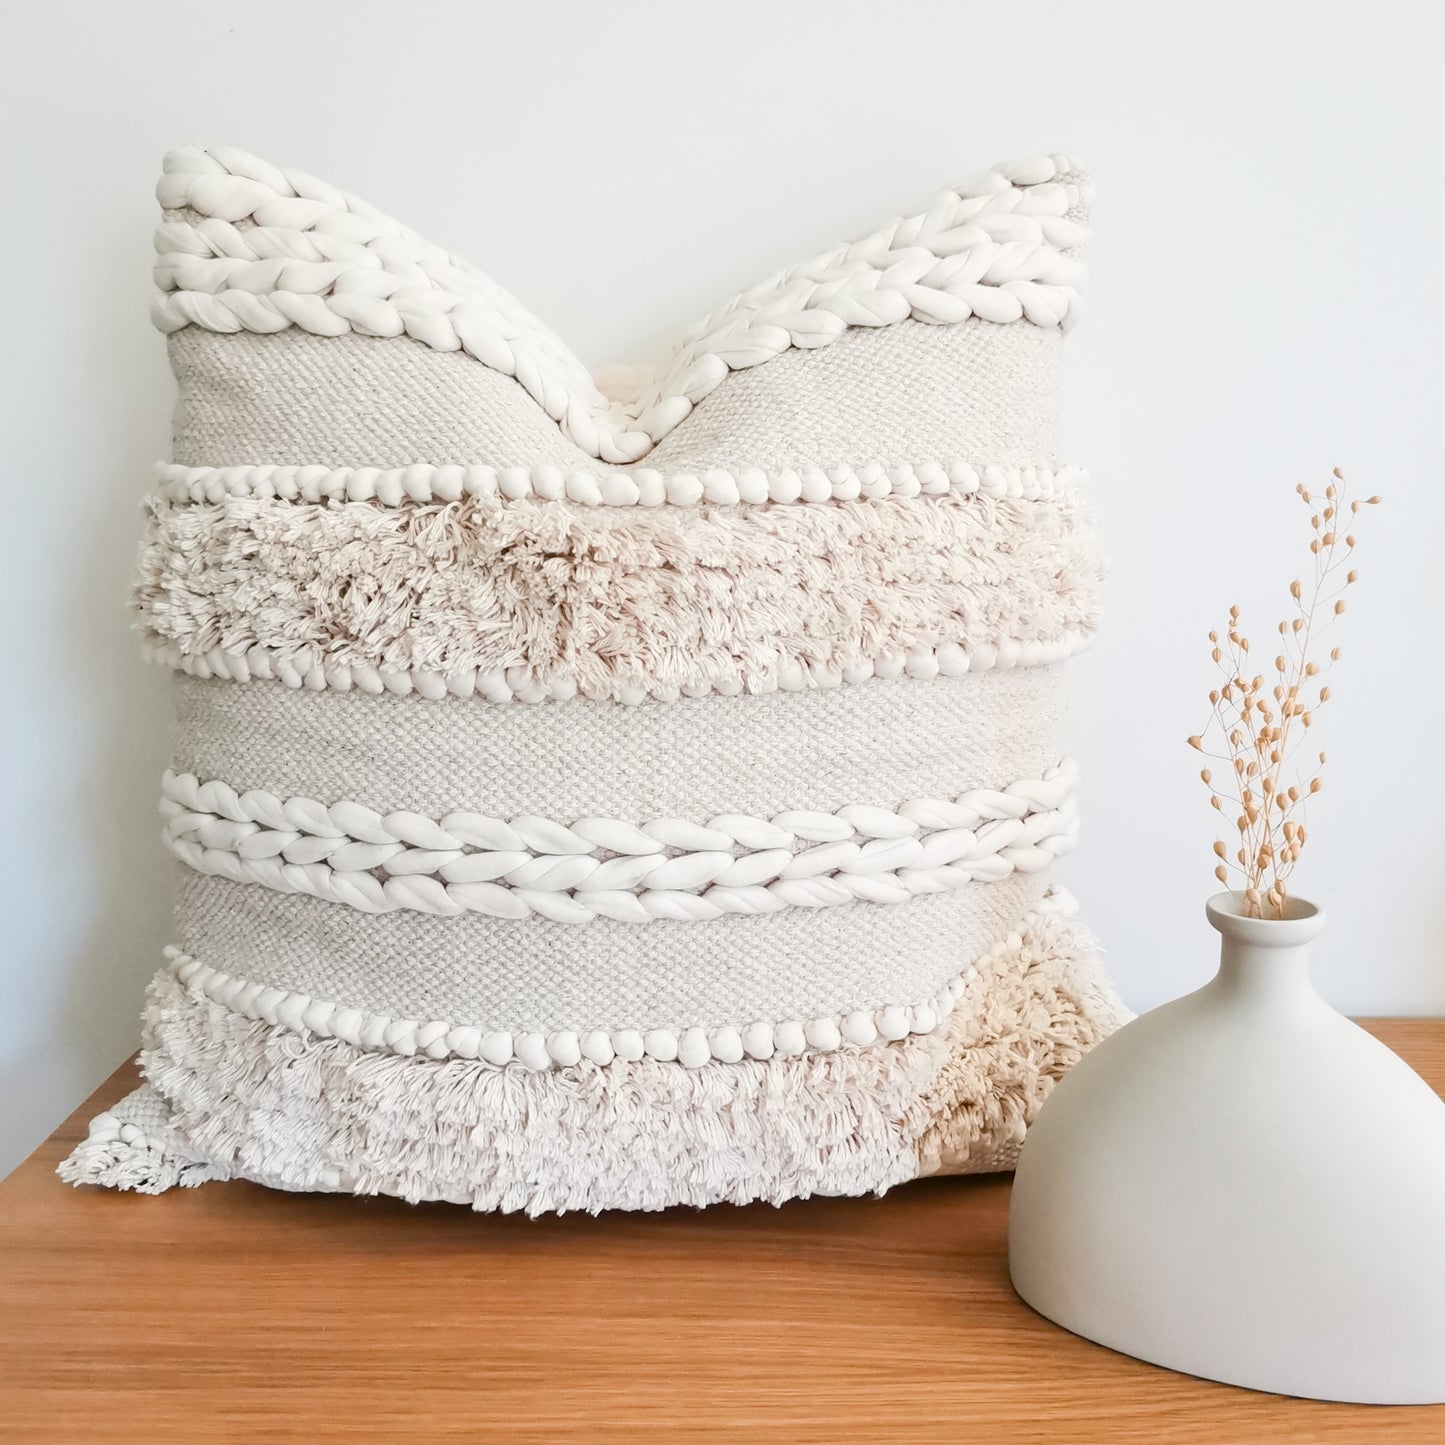 White boho cushion with frills and handloom weave